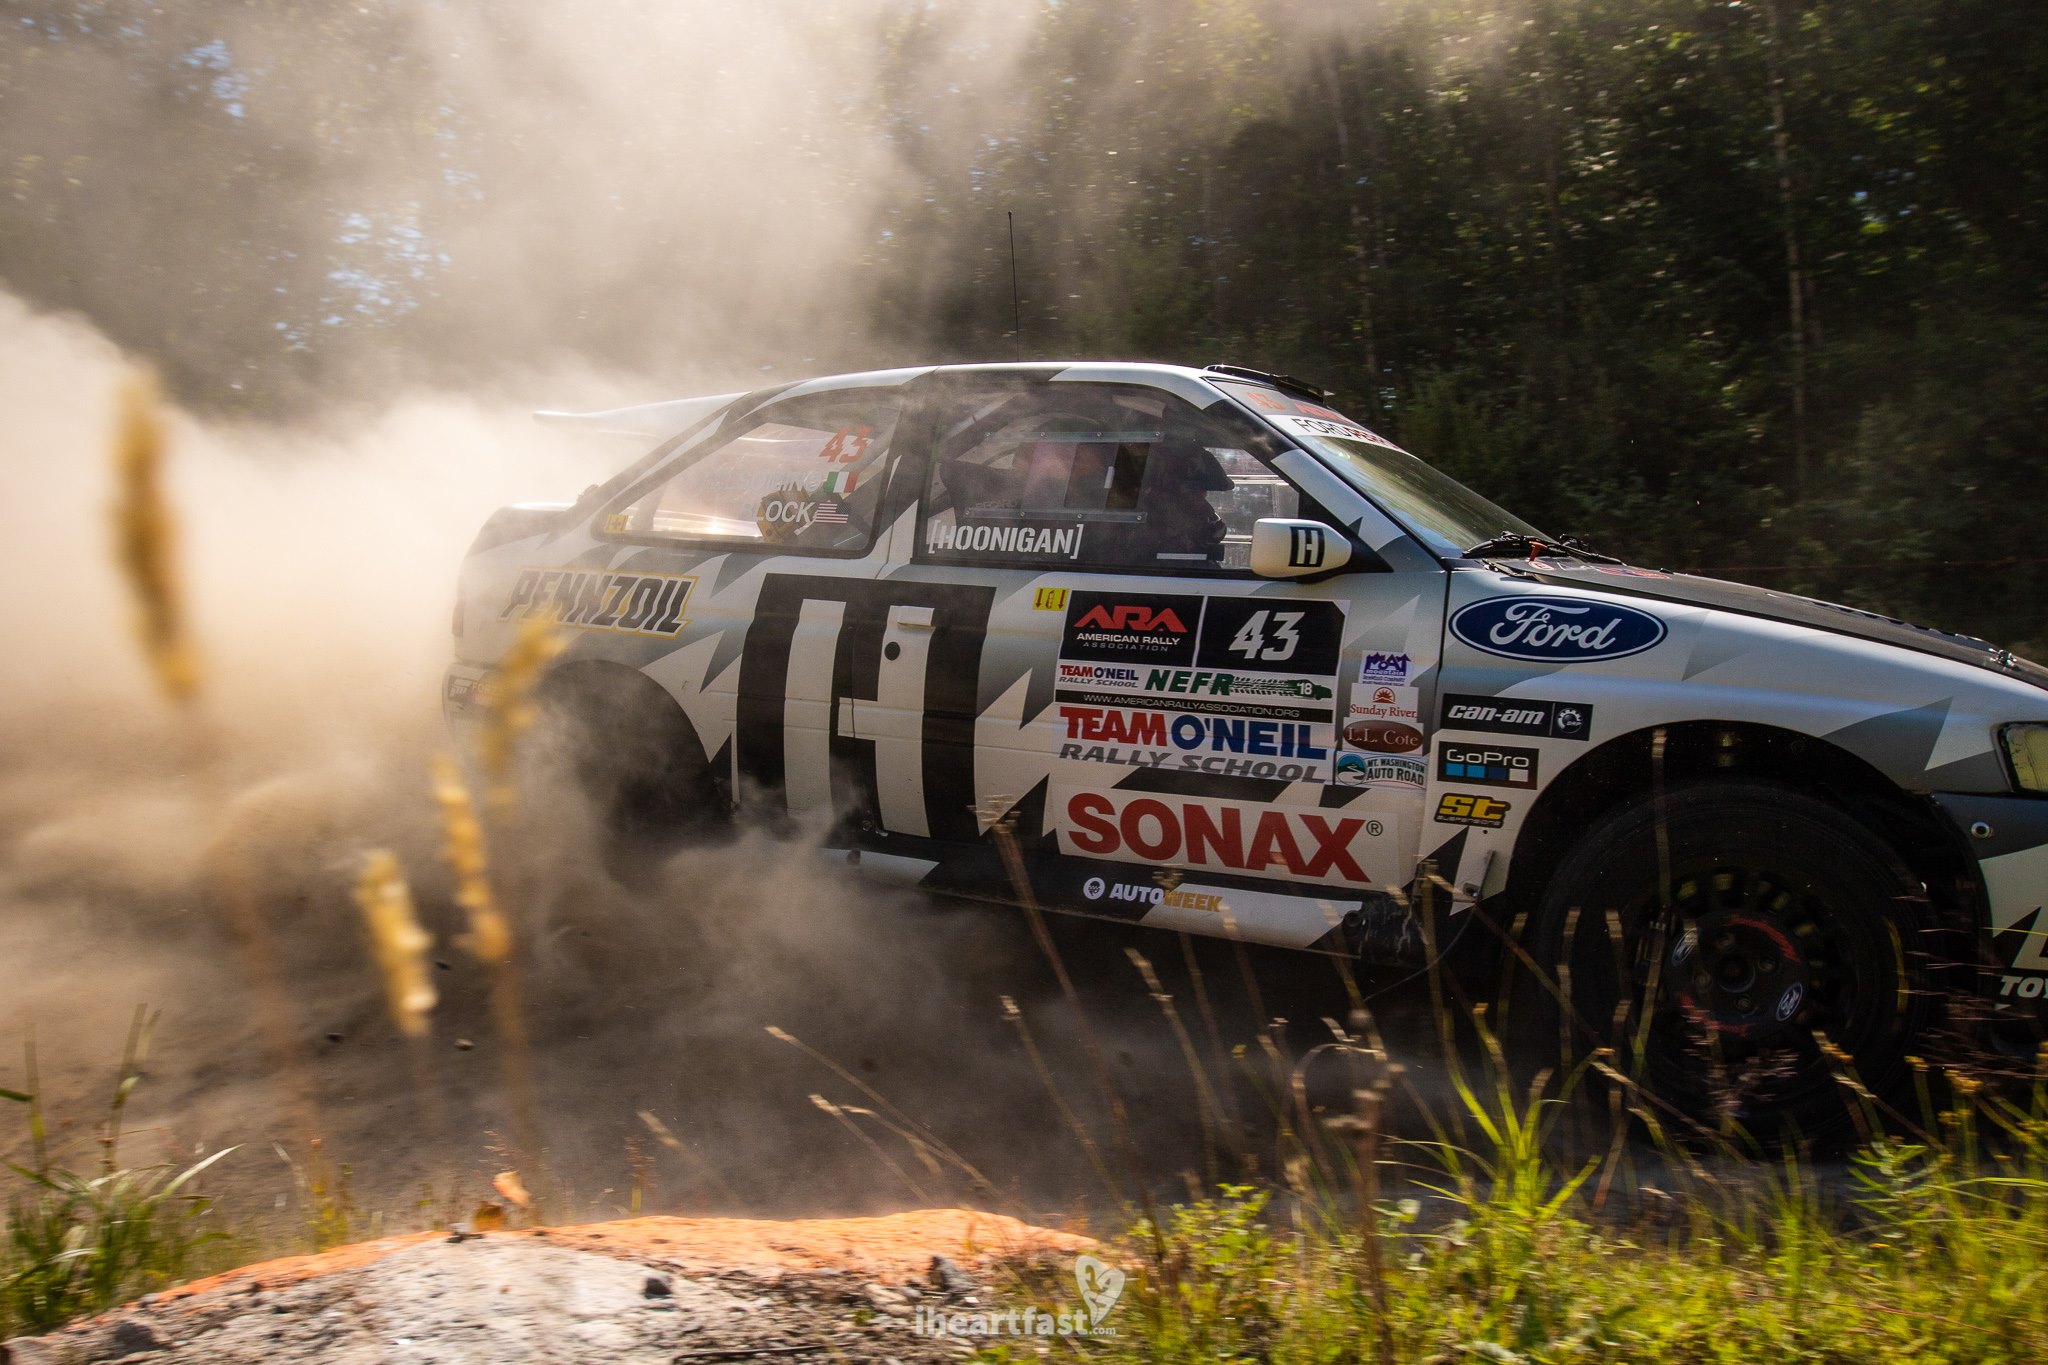 Ken Block and Alex Gelsomino pilot the Hoonigan Group A Ford Escort Cosworth at NEFR